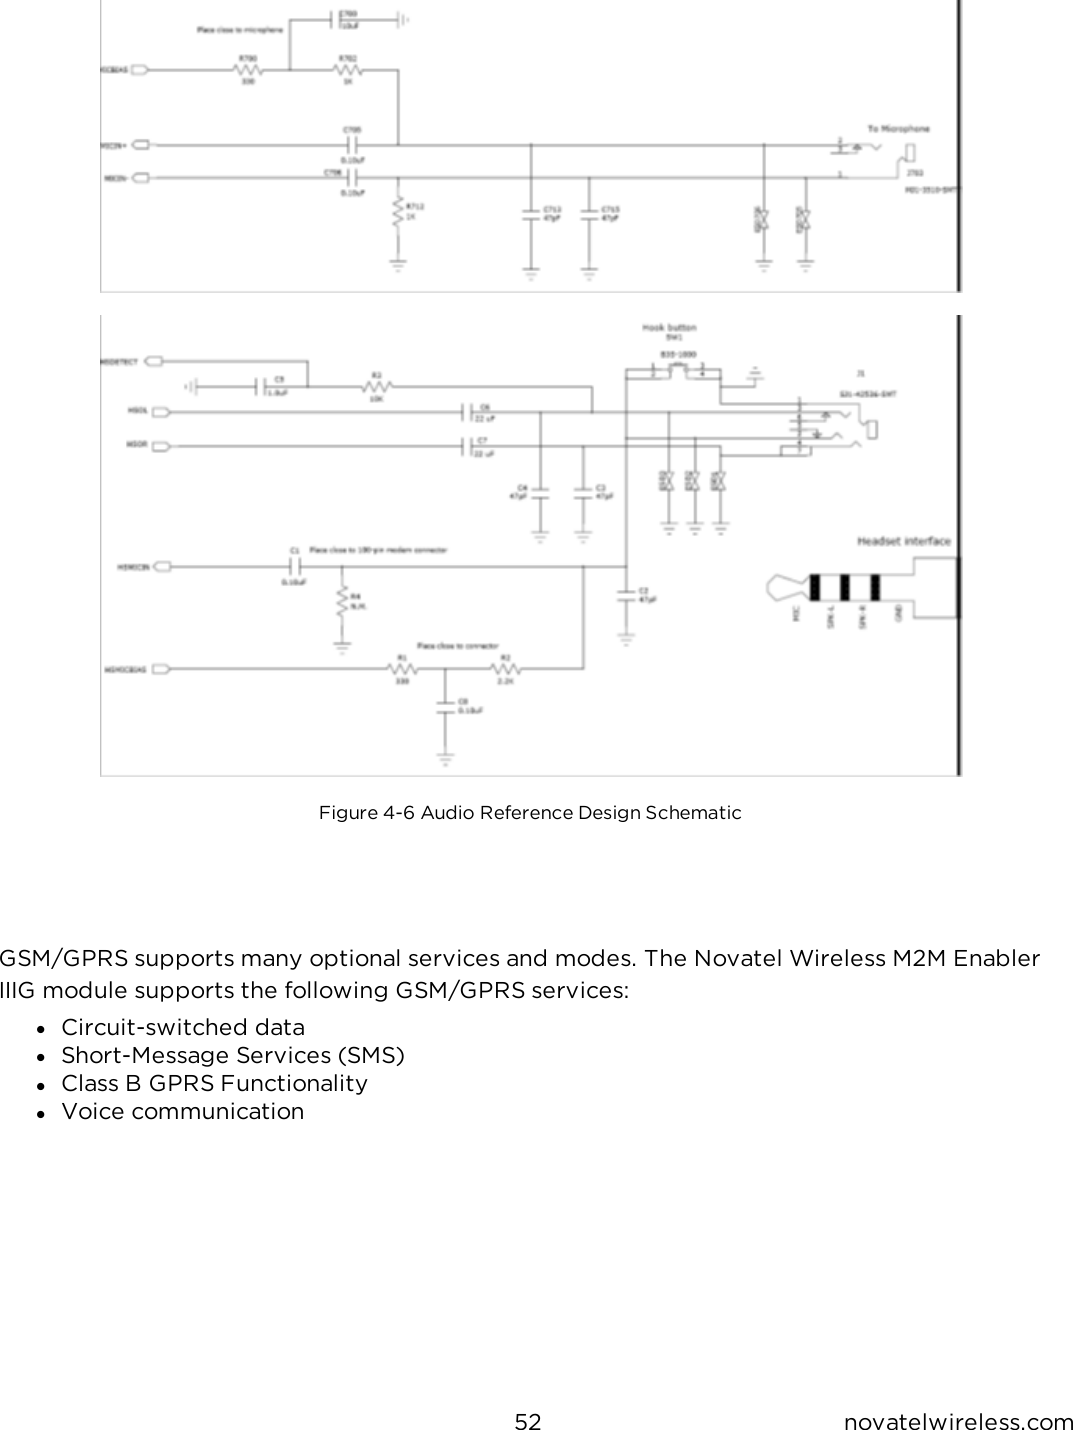 52 novatelwireless.comFigure 4-6 Audio Reference Design SchematicGSM/GPRS supports many optional services and modes.  The Novatel Wireless M2M Enabler IIIG module supports the following GSM/GPRS services:l  Circuit-switched datal  Short-Message Services (SMS)l  Class B GPRS Functionalityl  Voice communication